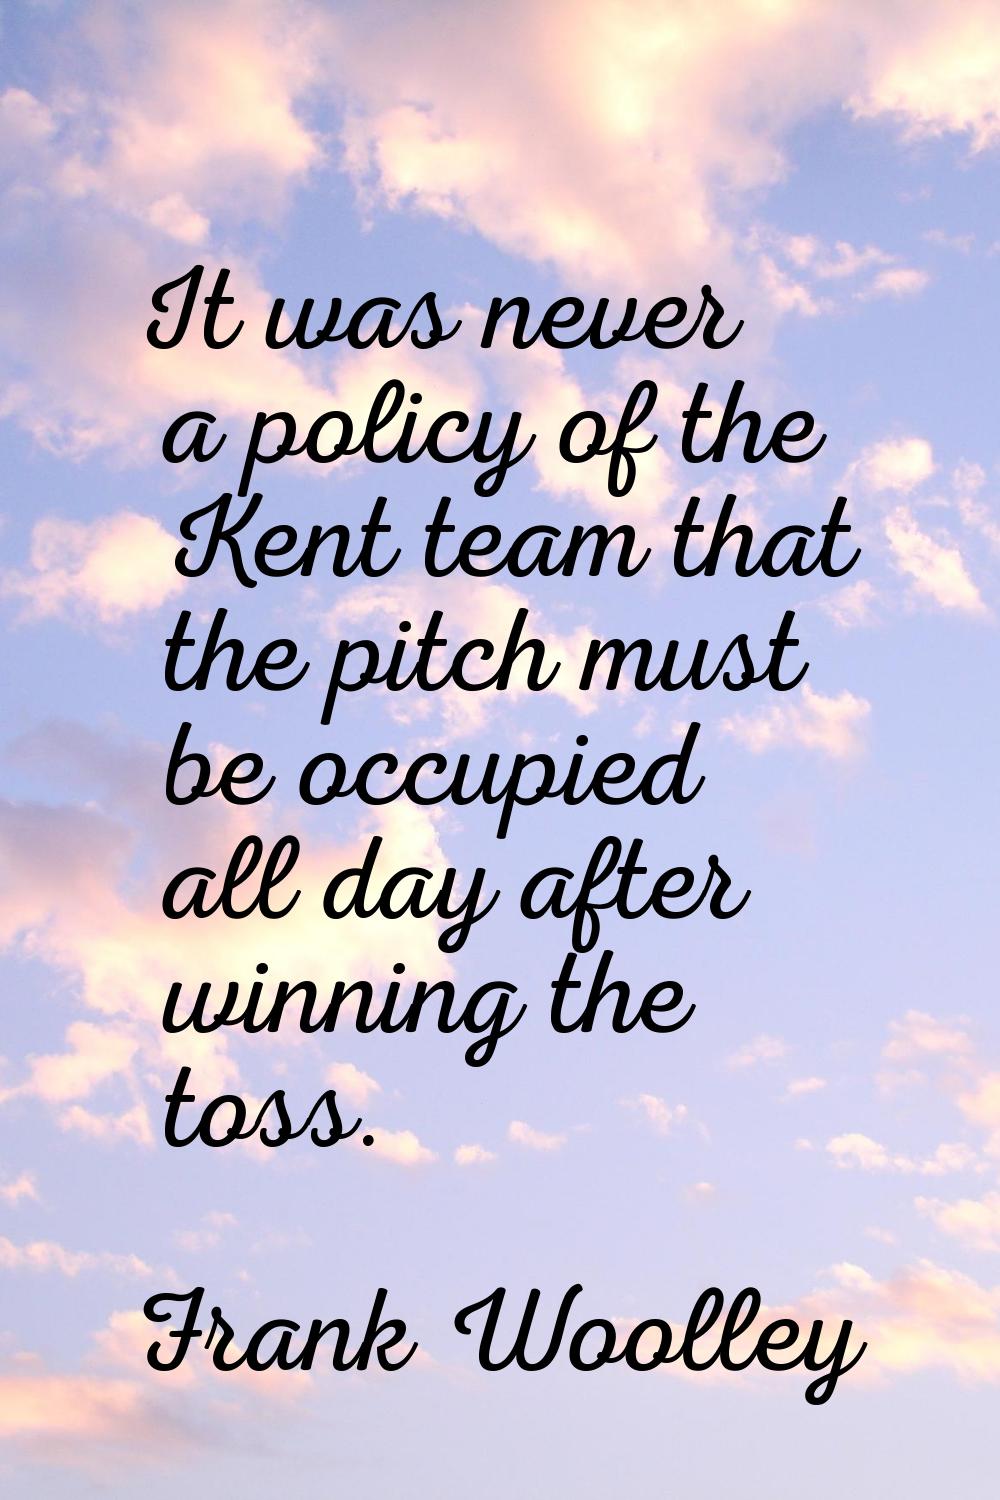 It was never a policy of the Kent team that the pitch must be occupied all day after winning the to